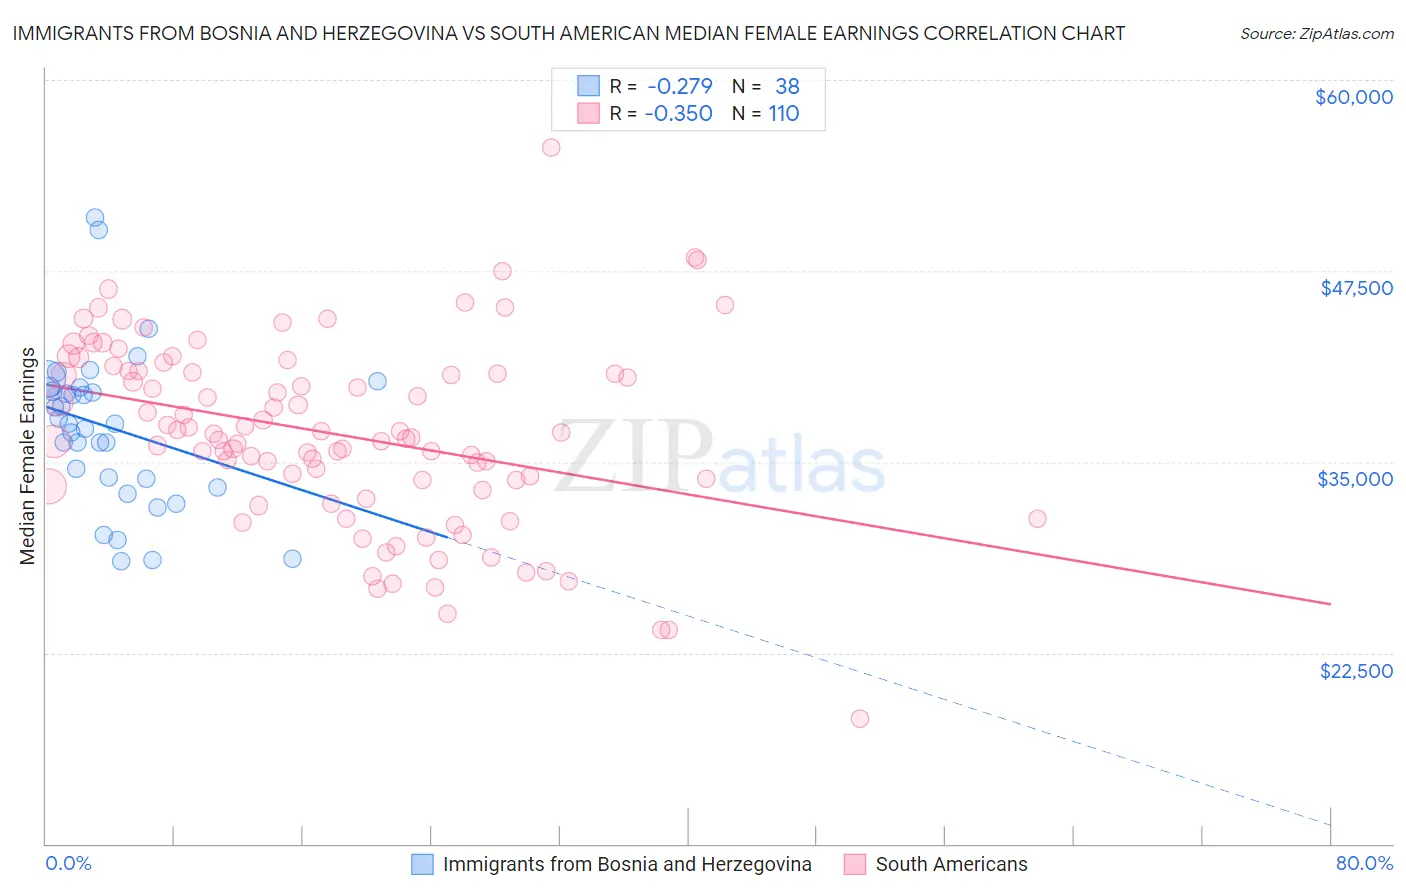 Immigrants from Bosnia and Herzegovina vs South American Median Female Earnings